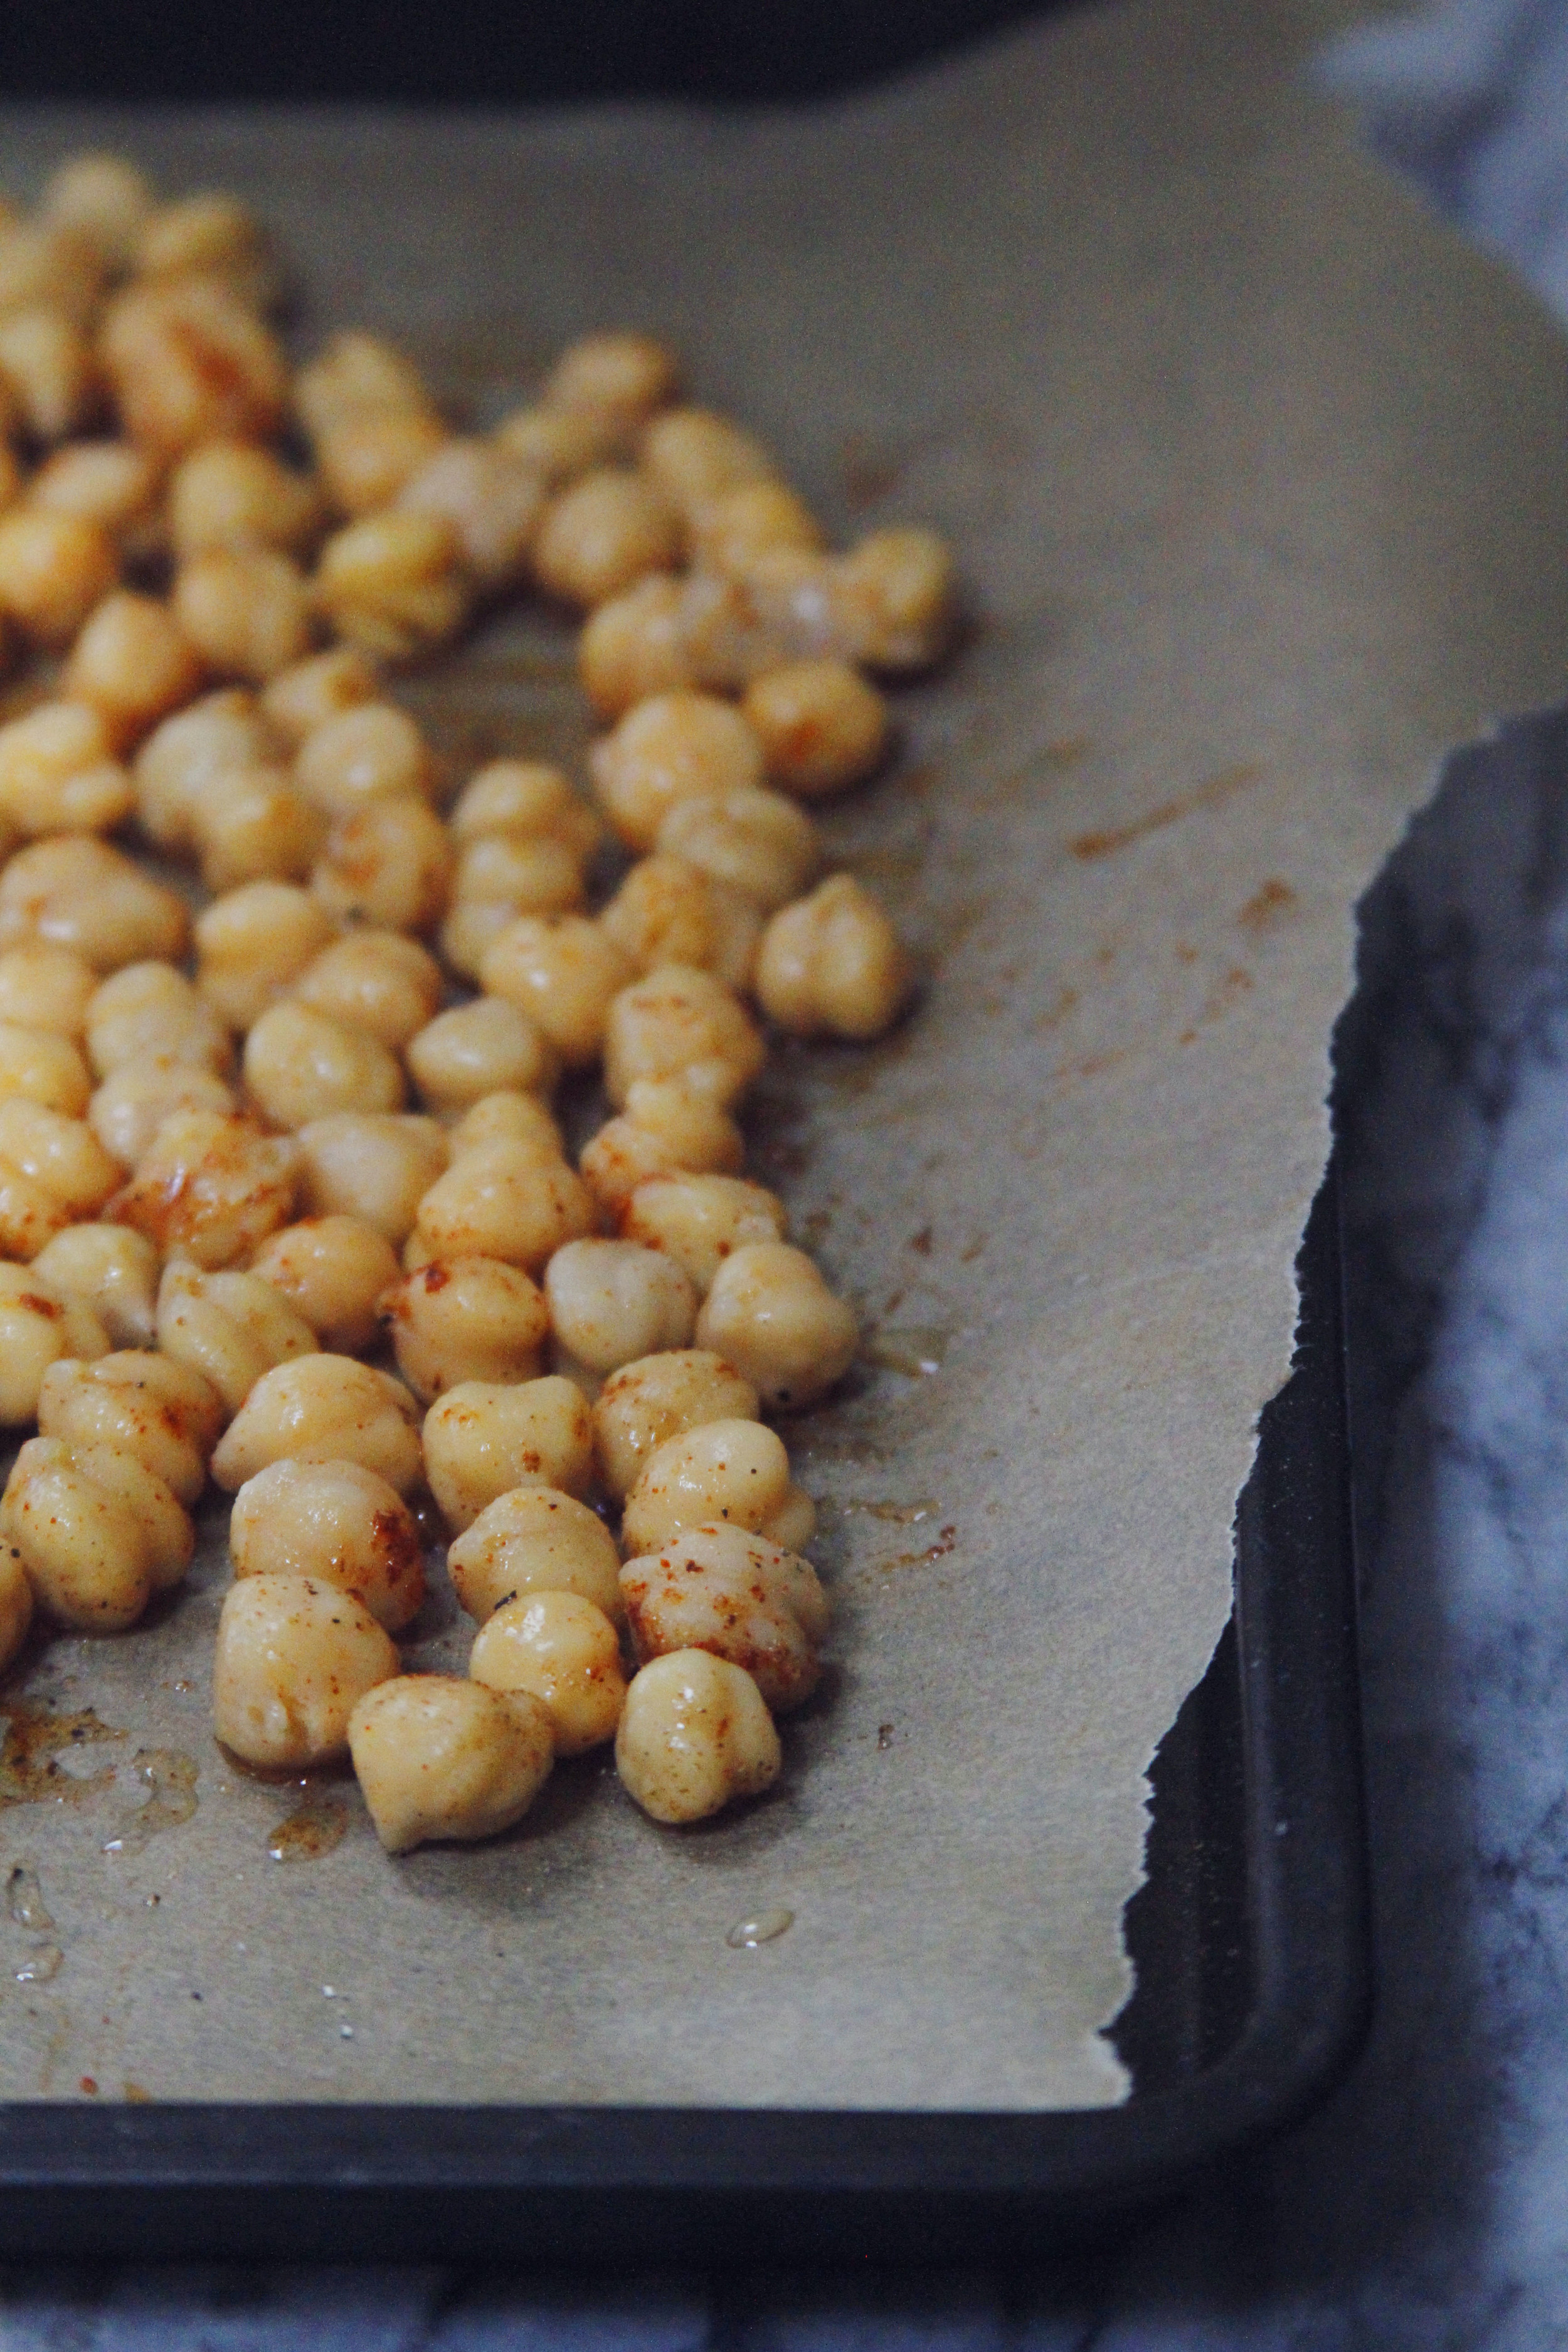 Spicy baked chickpeas // Print (Em) Shop